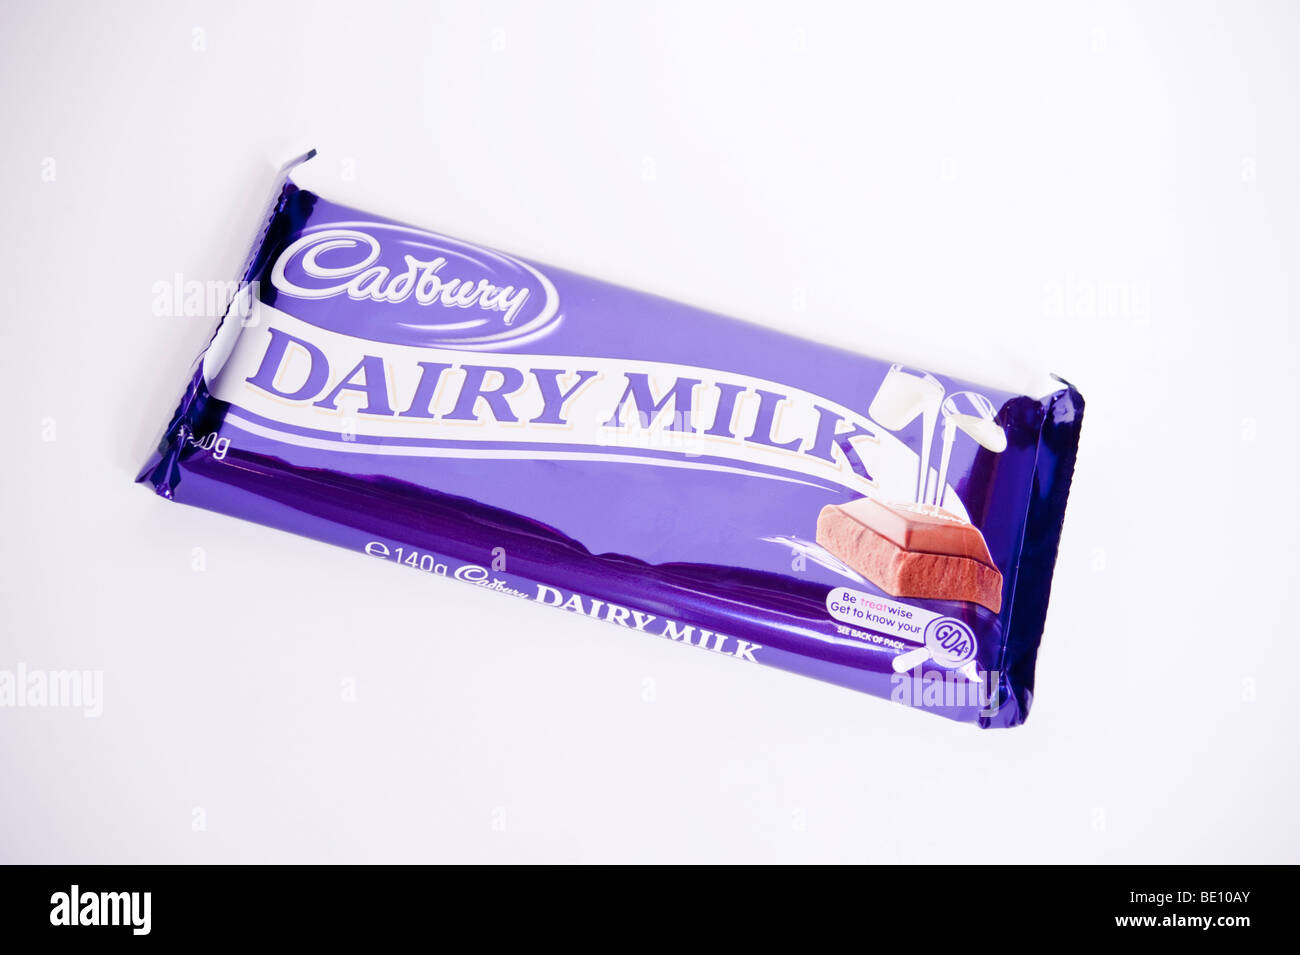 A close up of a bar of cadbury dairy milk chocolate on a white background Stock Photo